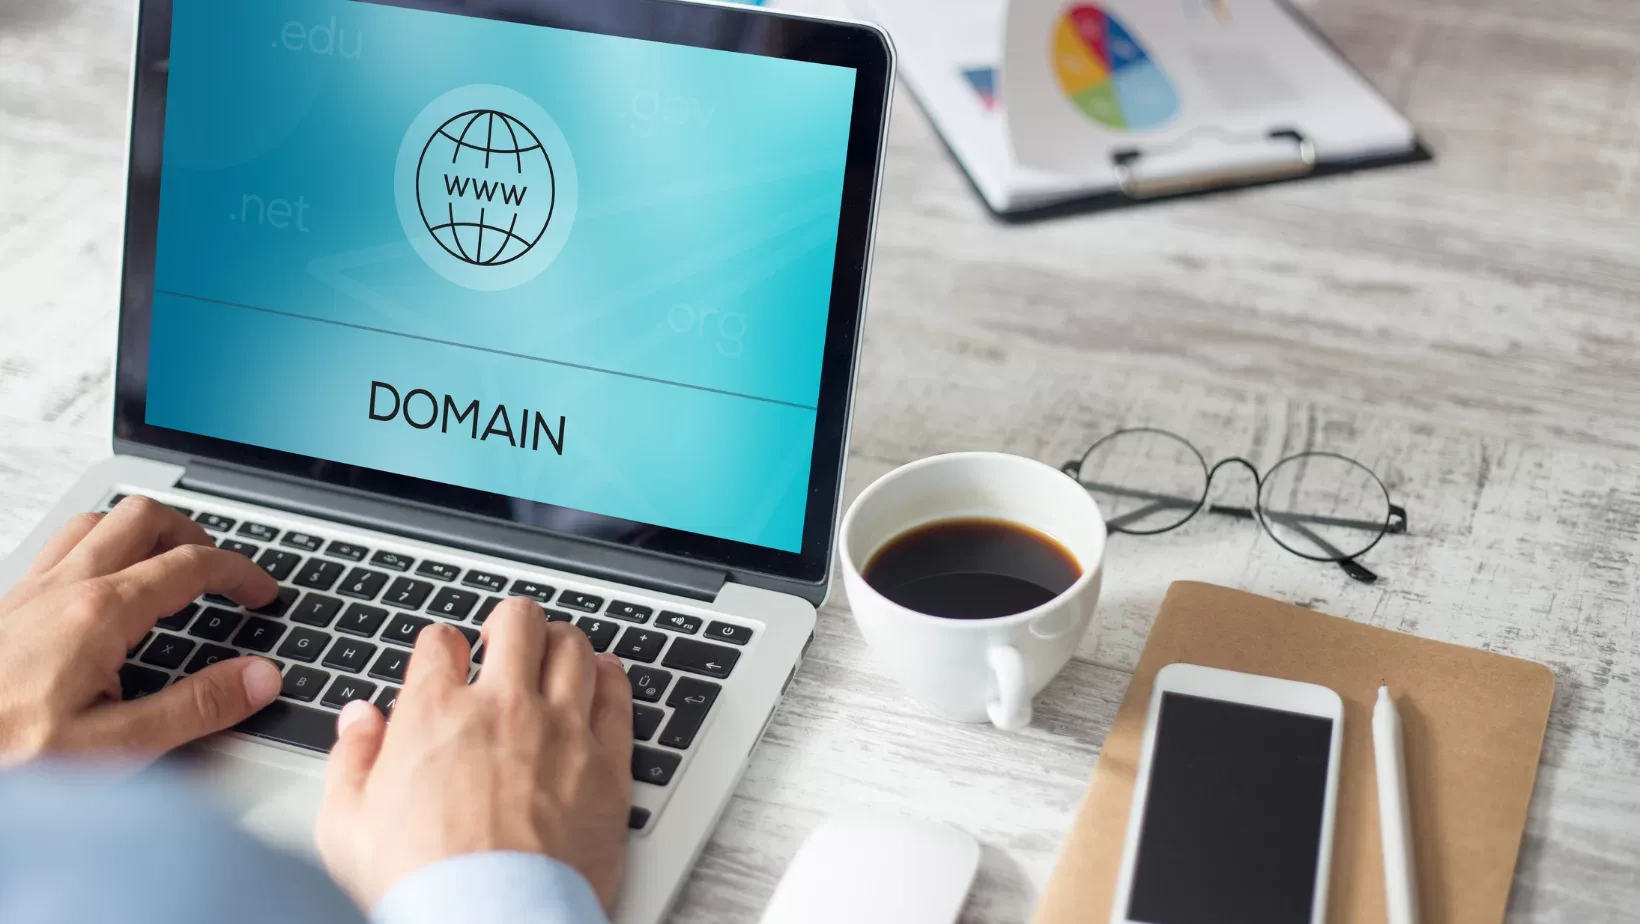 How to Check When Your Domain Name Expires?